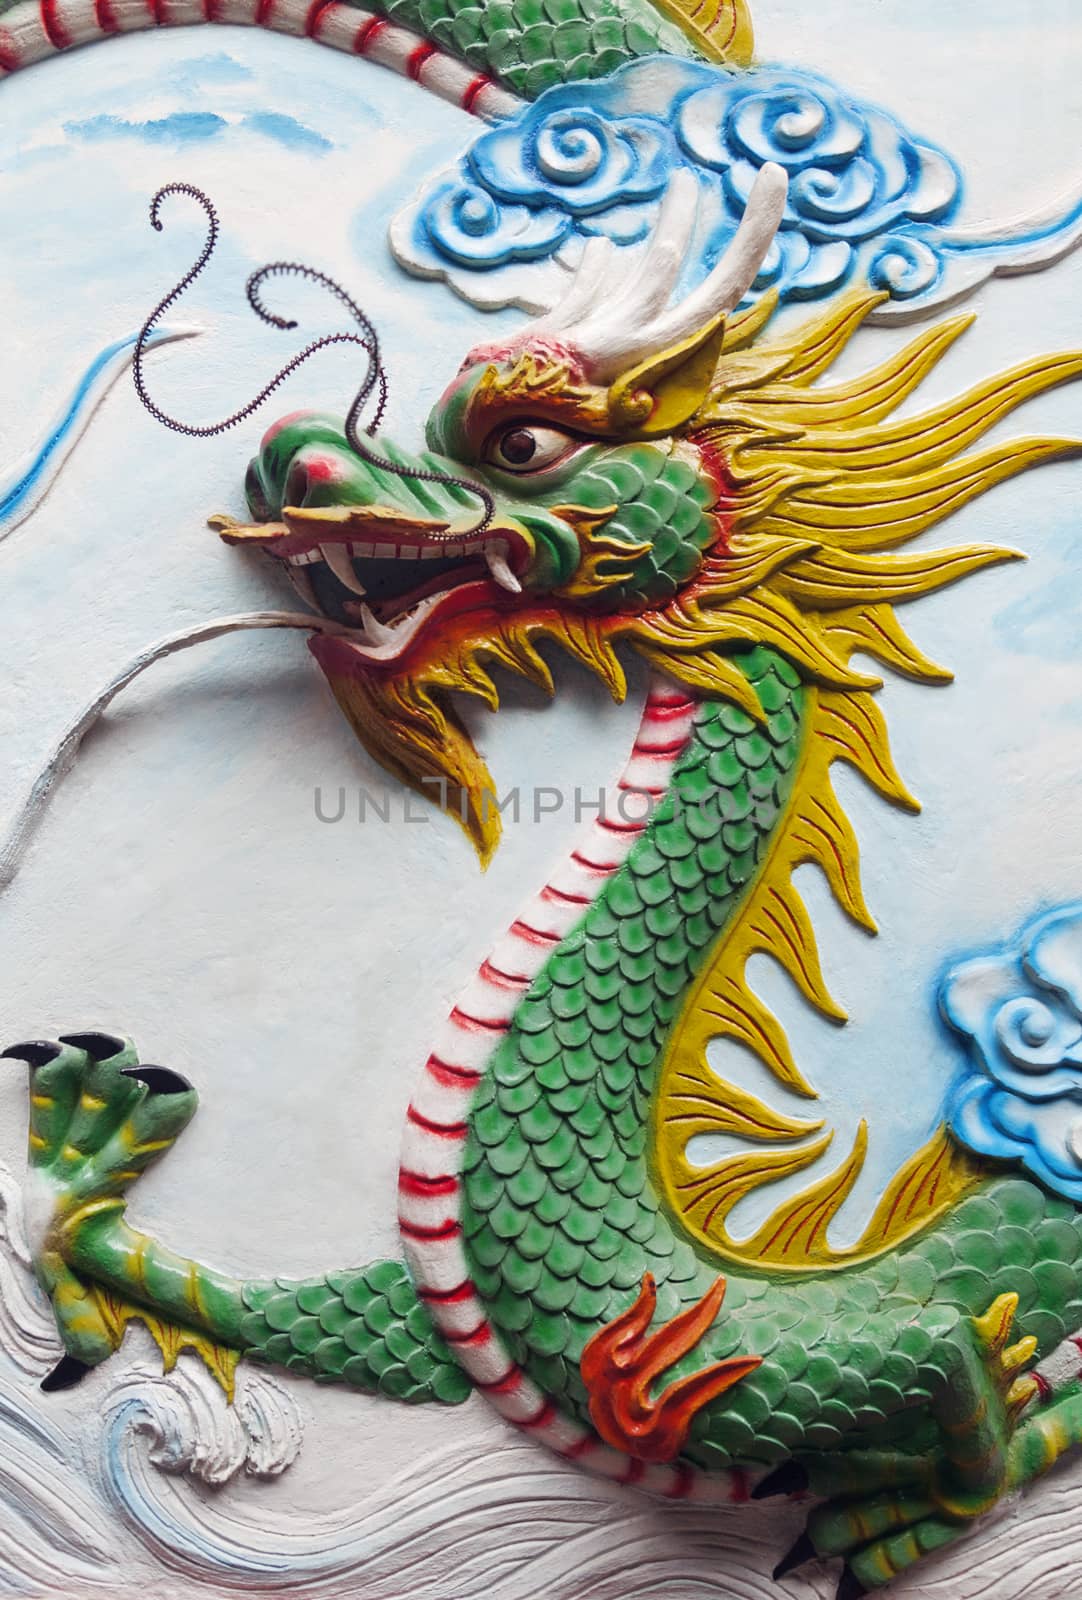 Dragon decoration of a temple in Vietnam by Goodday